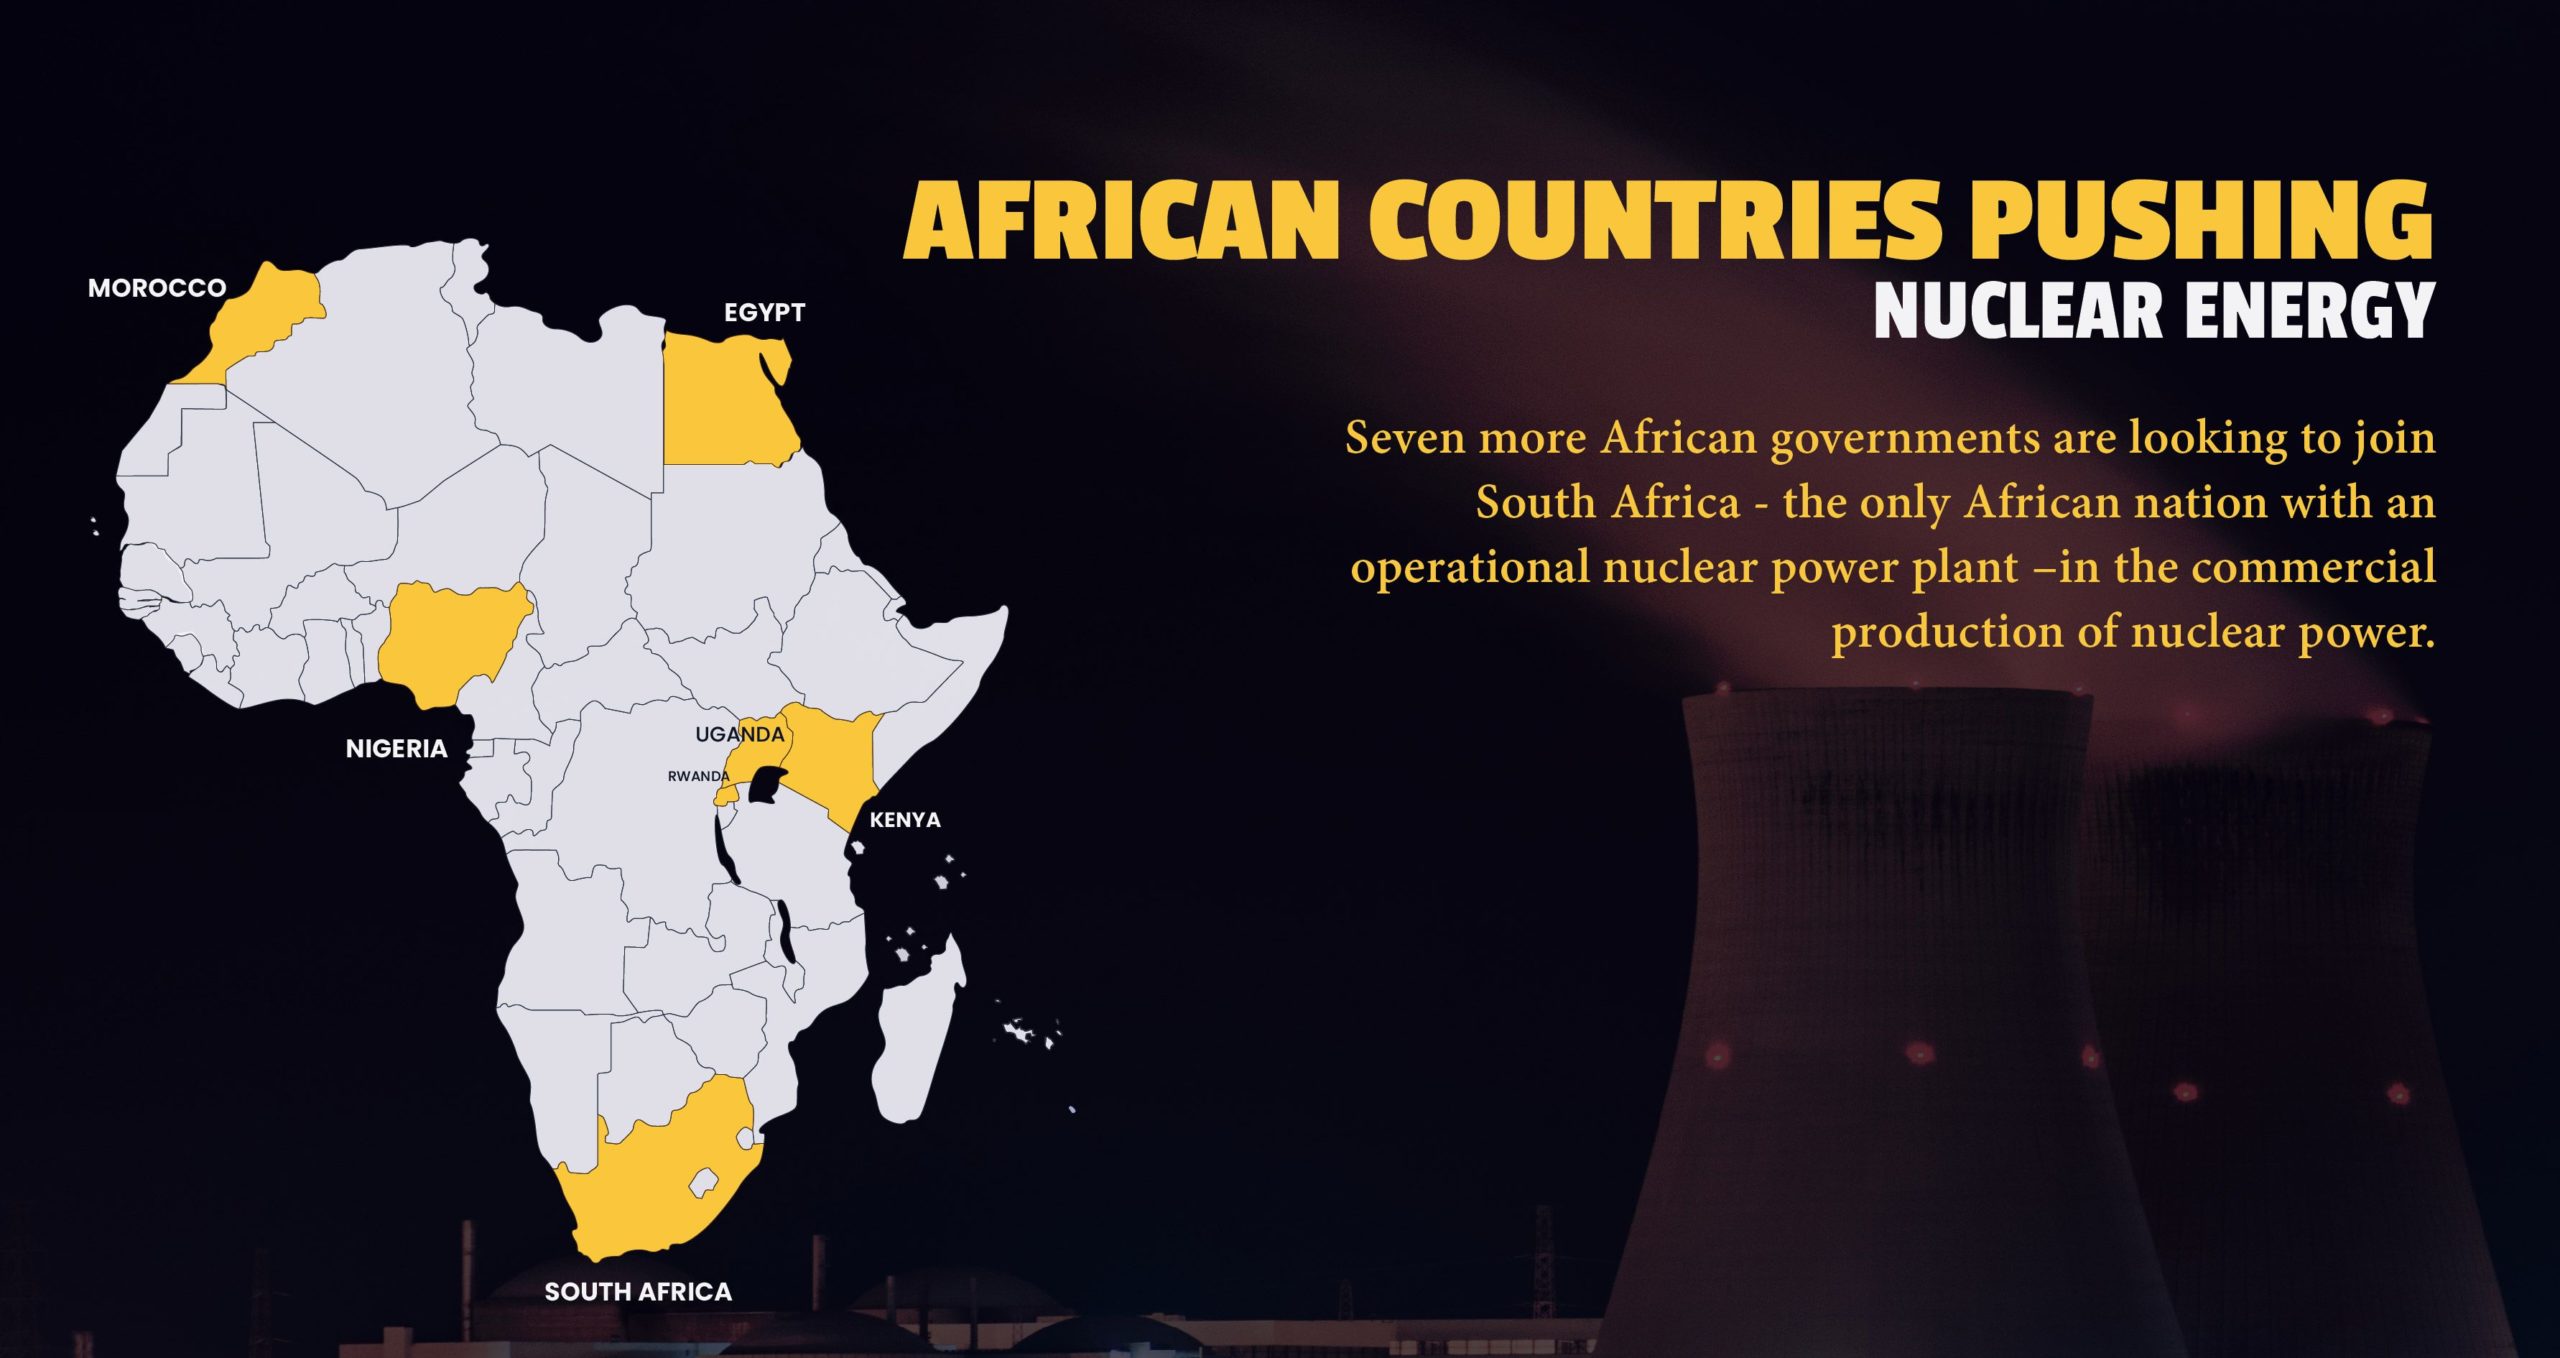 African Countries pushing nuclear energy